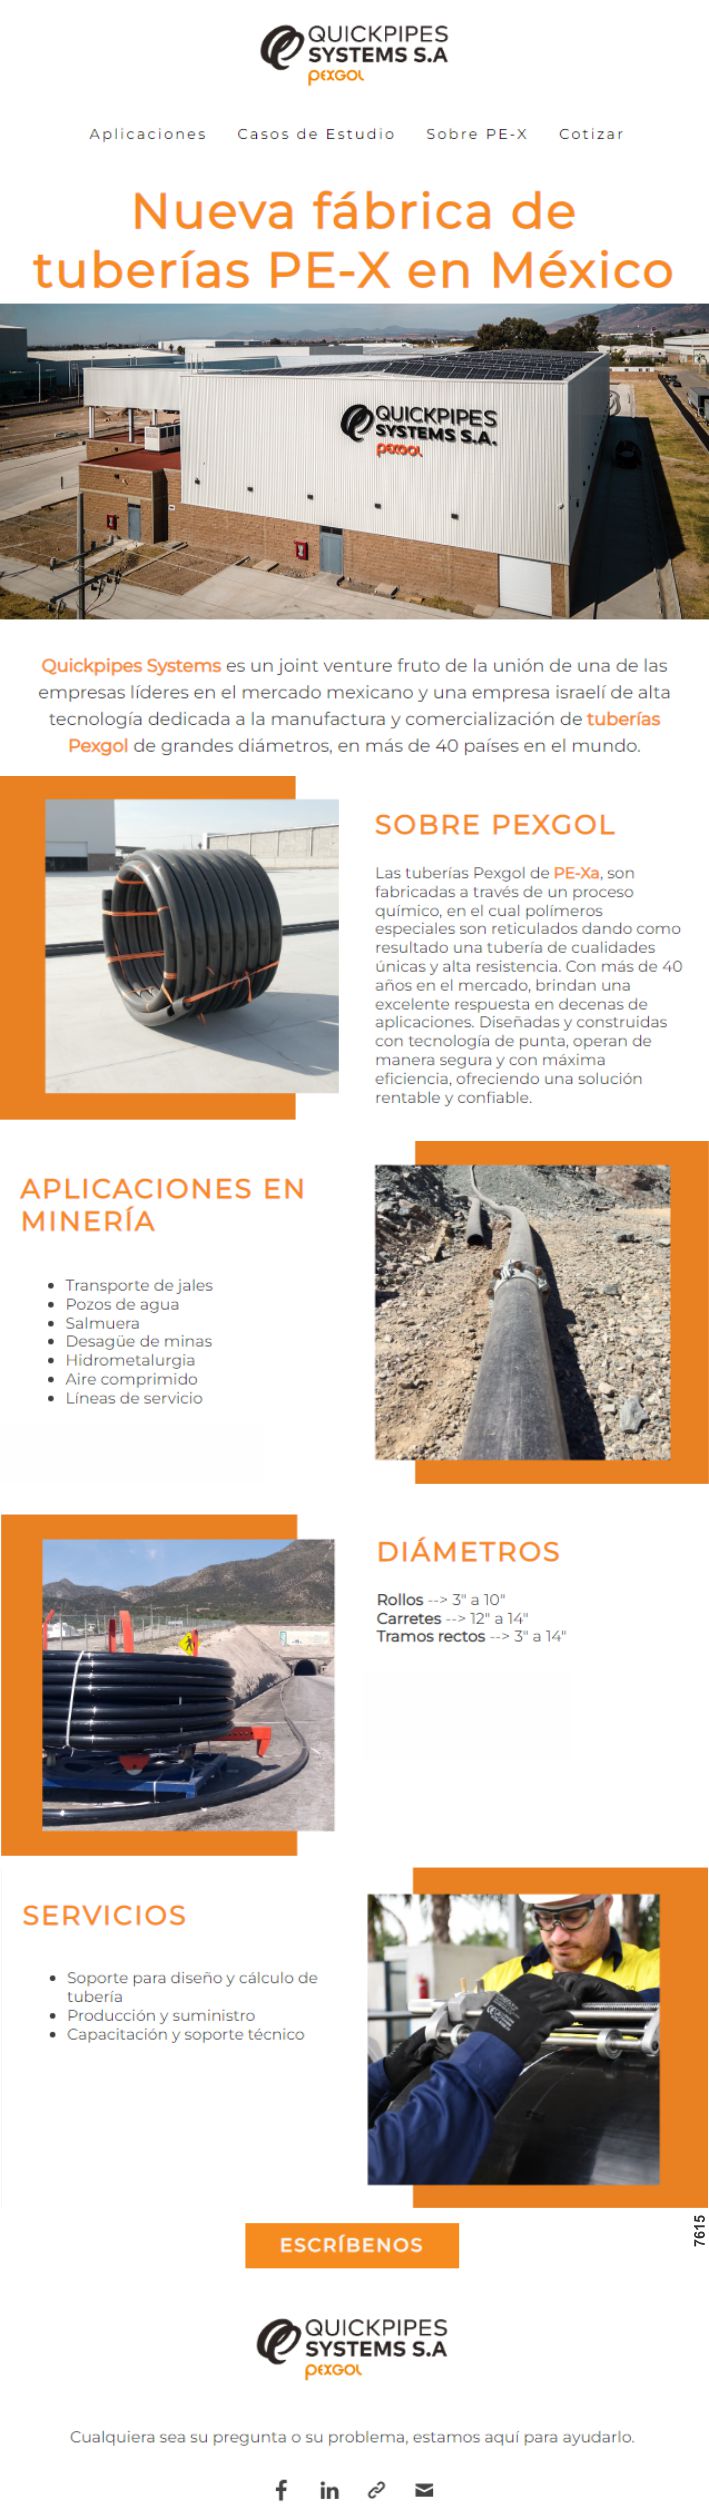 New PE-X pipe factory in Mexico. Quickpipes Systems is a high-tech joint venture dedicated to the manufacture and marketing of large diameter Pexgol pipes.